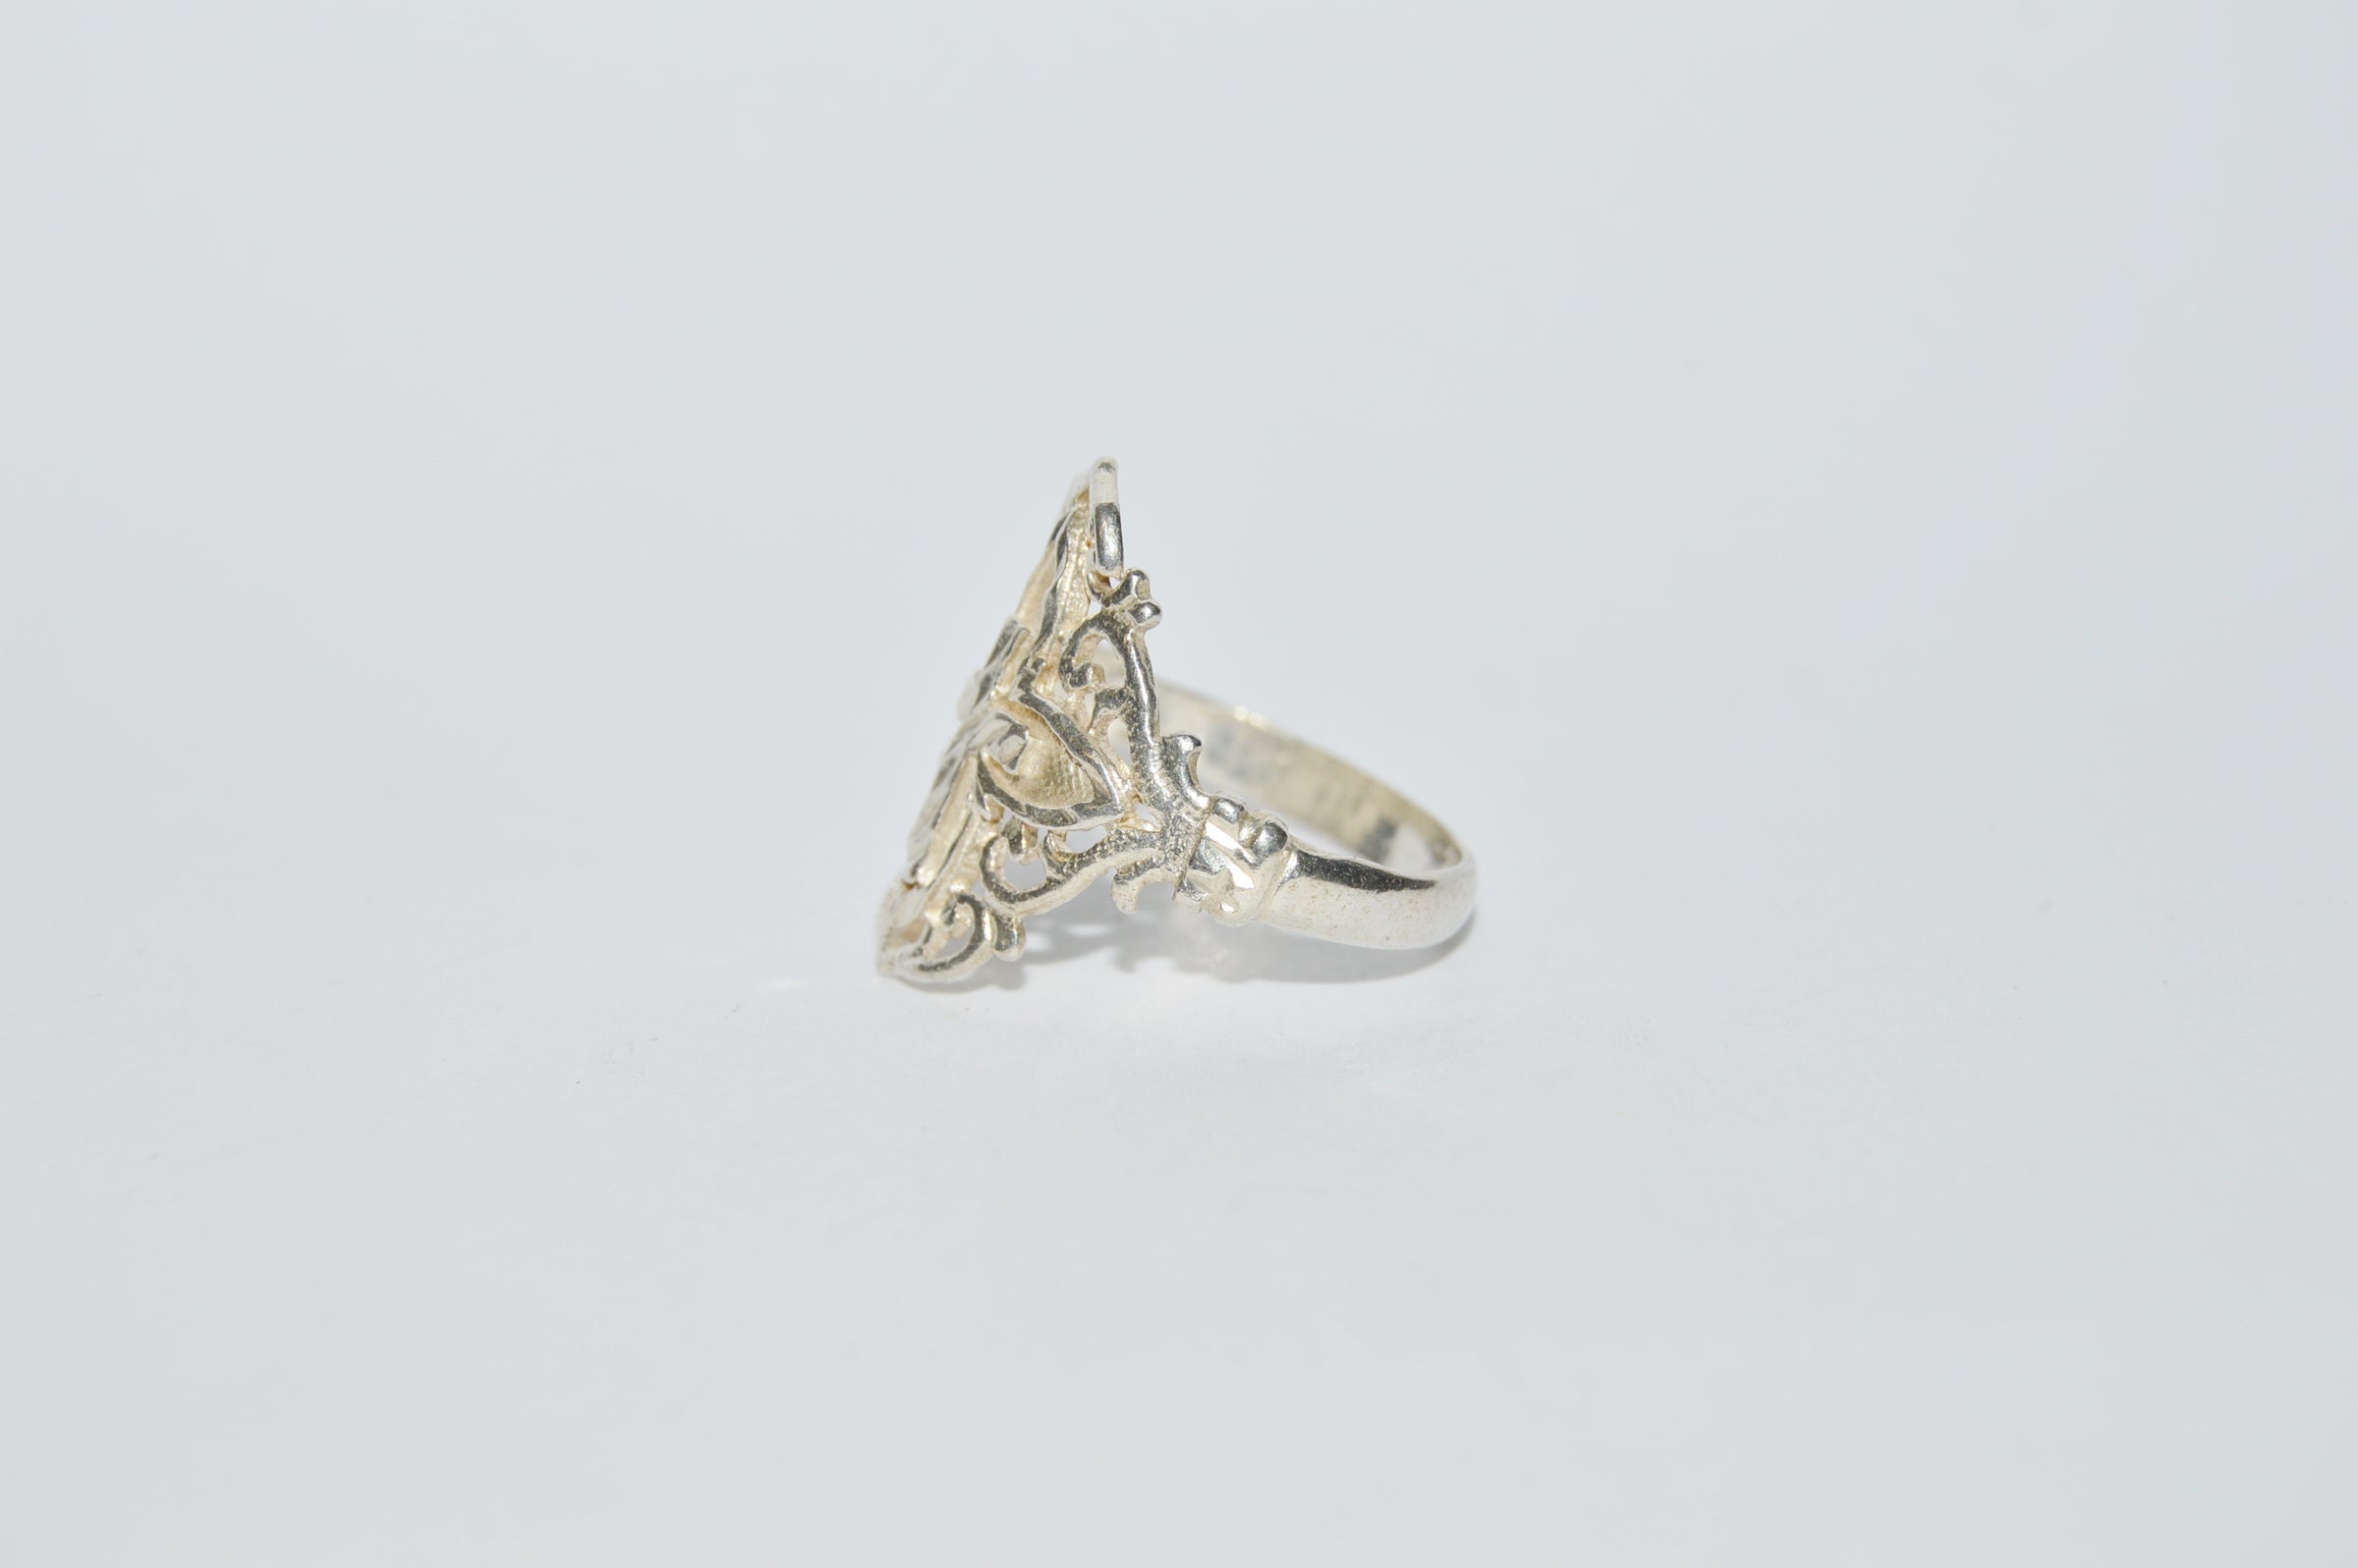 www.hersandhistreasures.com/products/925-sterling-silver-filigree-cross-ring